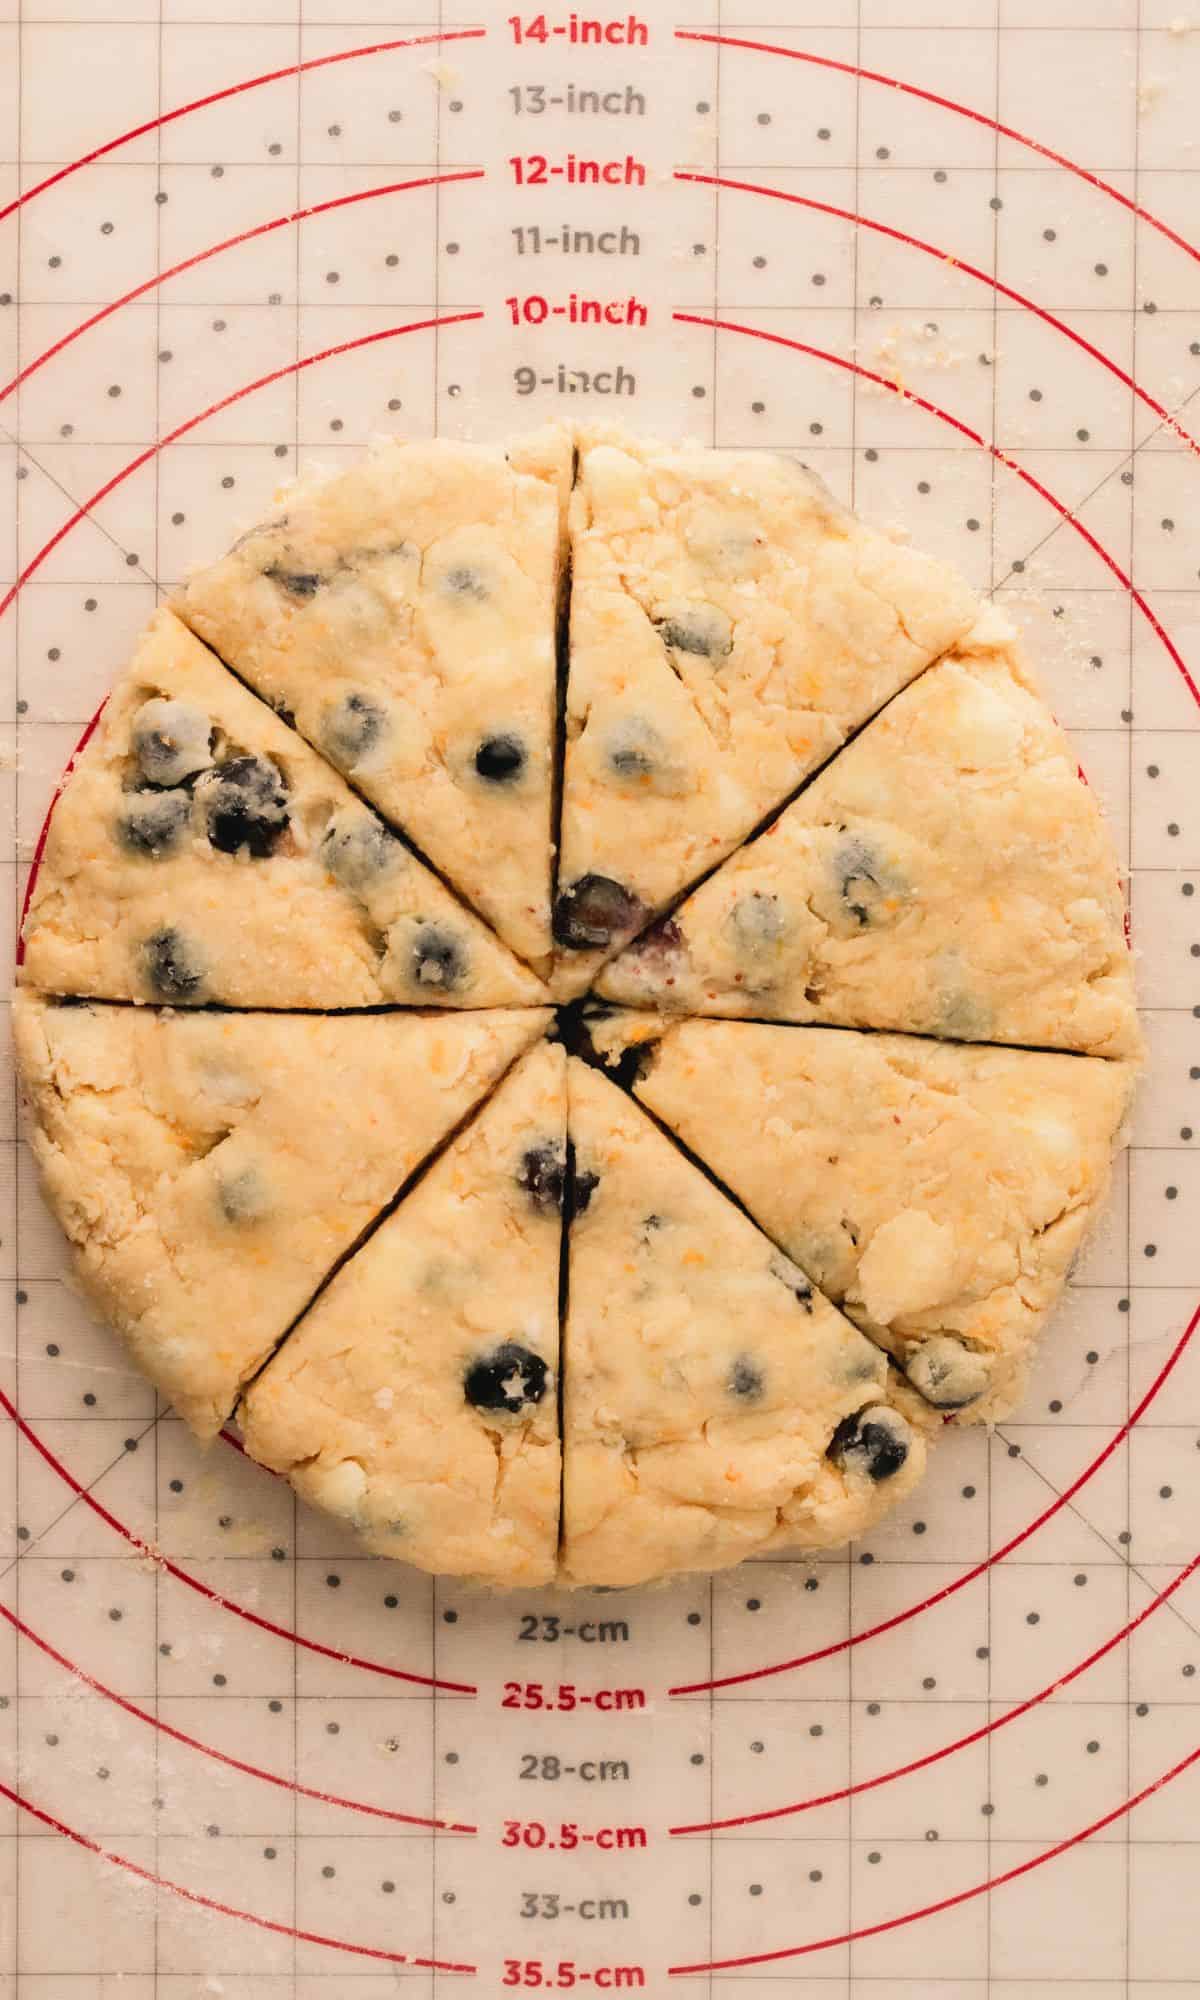 Blueberry scone dough after cutting into wedges.